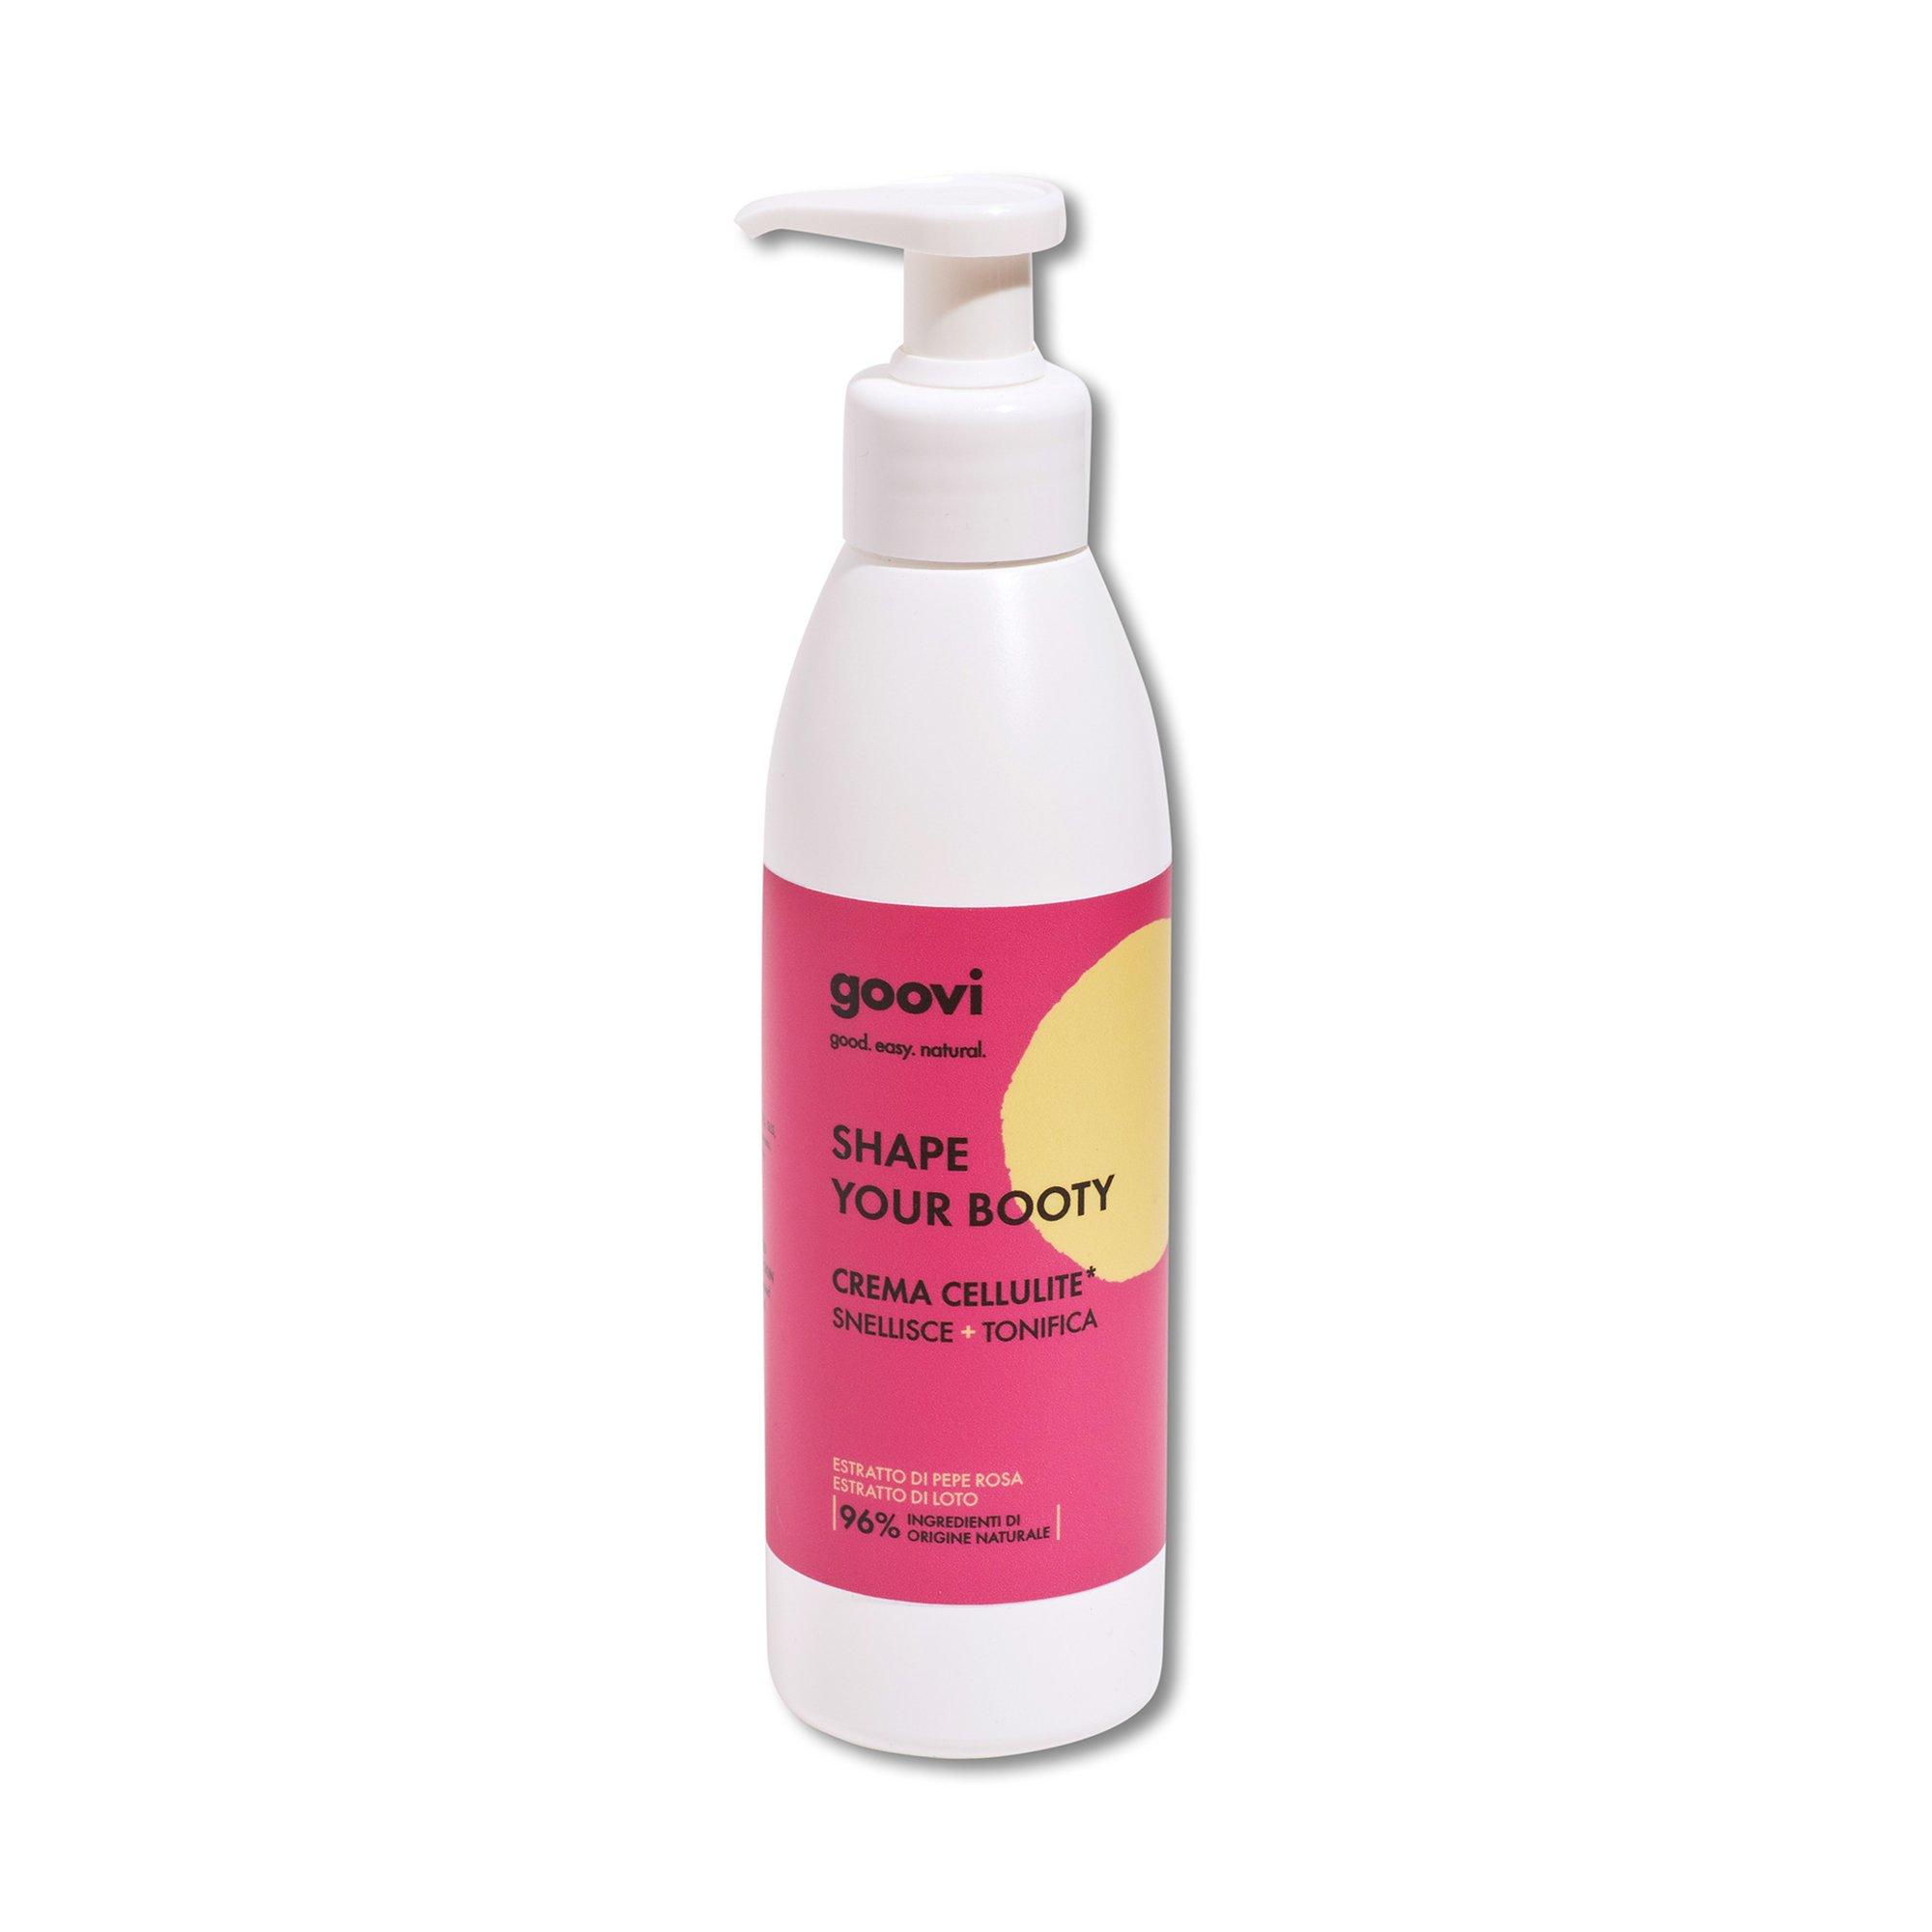 Image of Goovi Shape Your Booty Cellulite Creme - 240ml